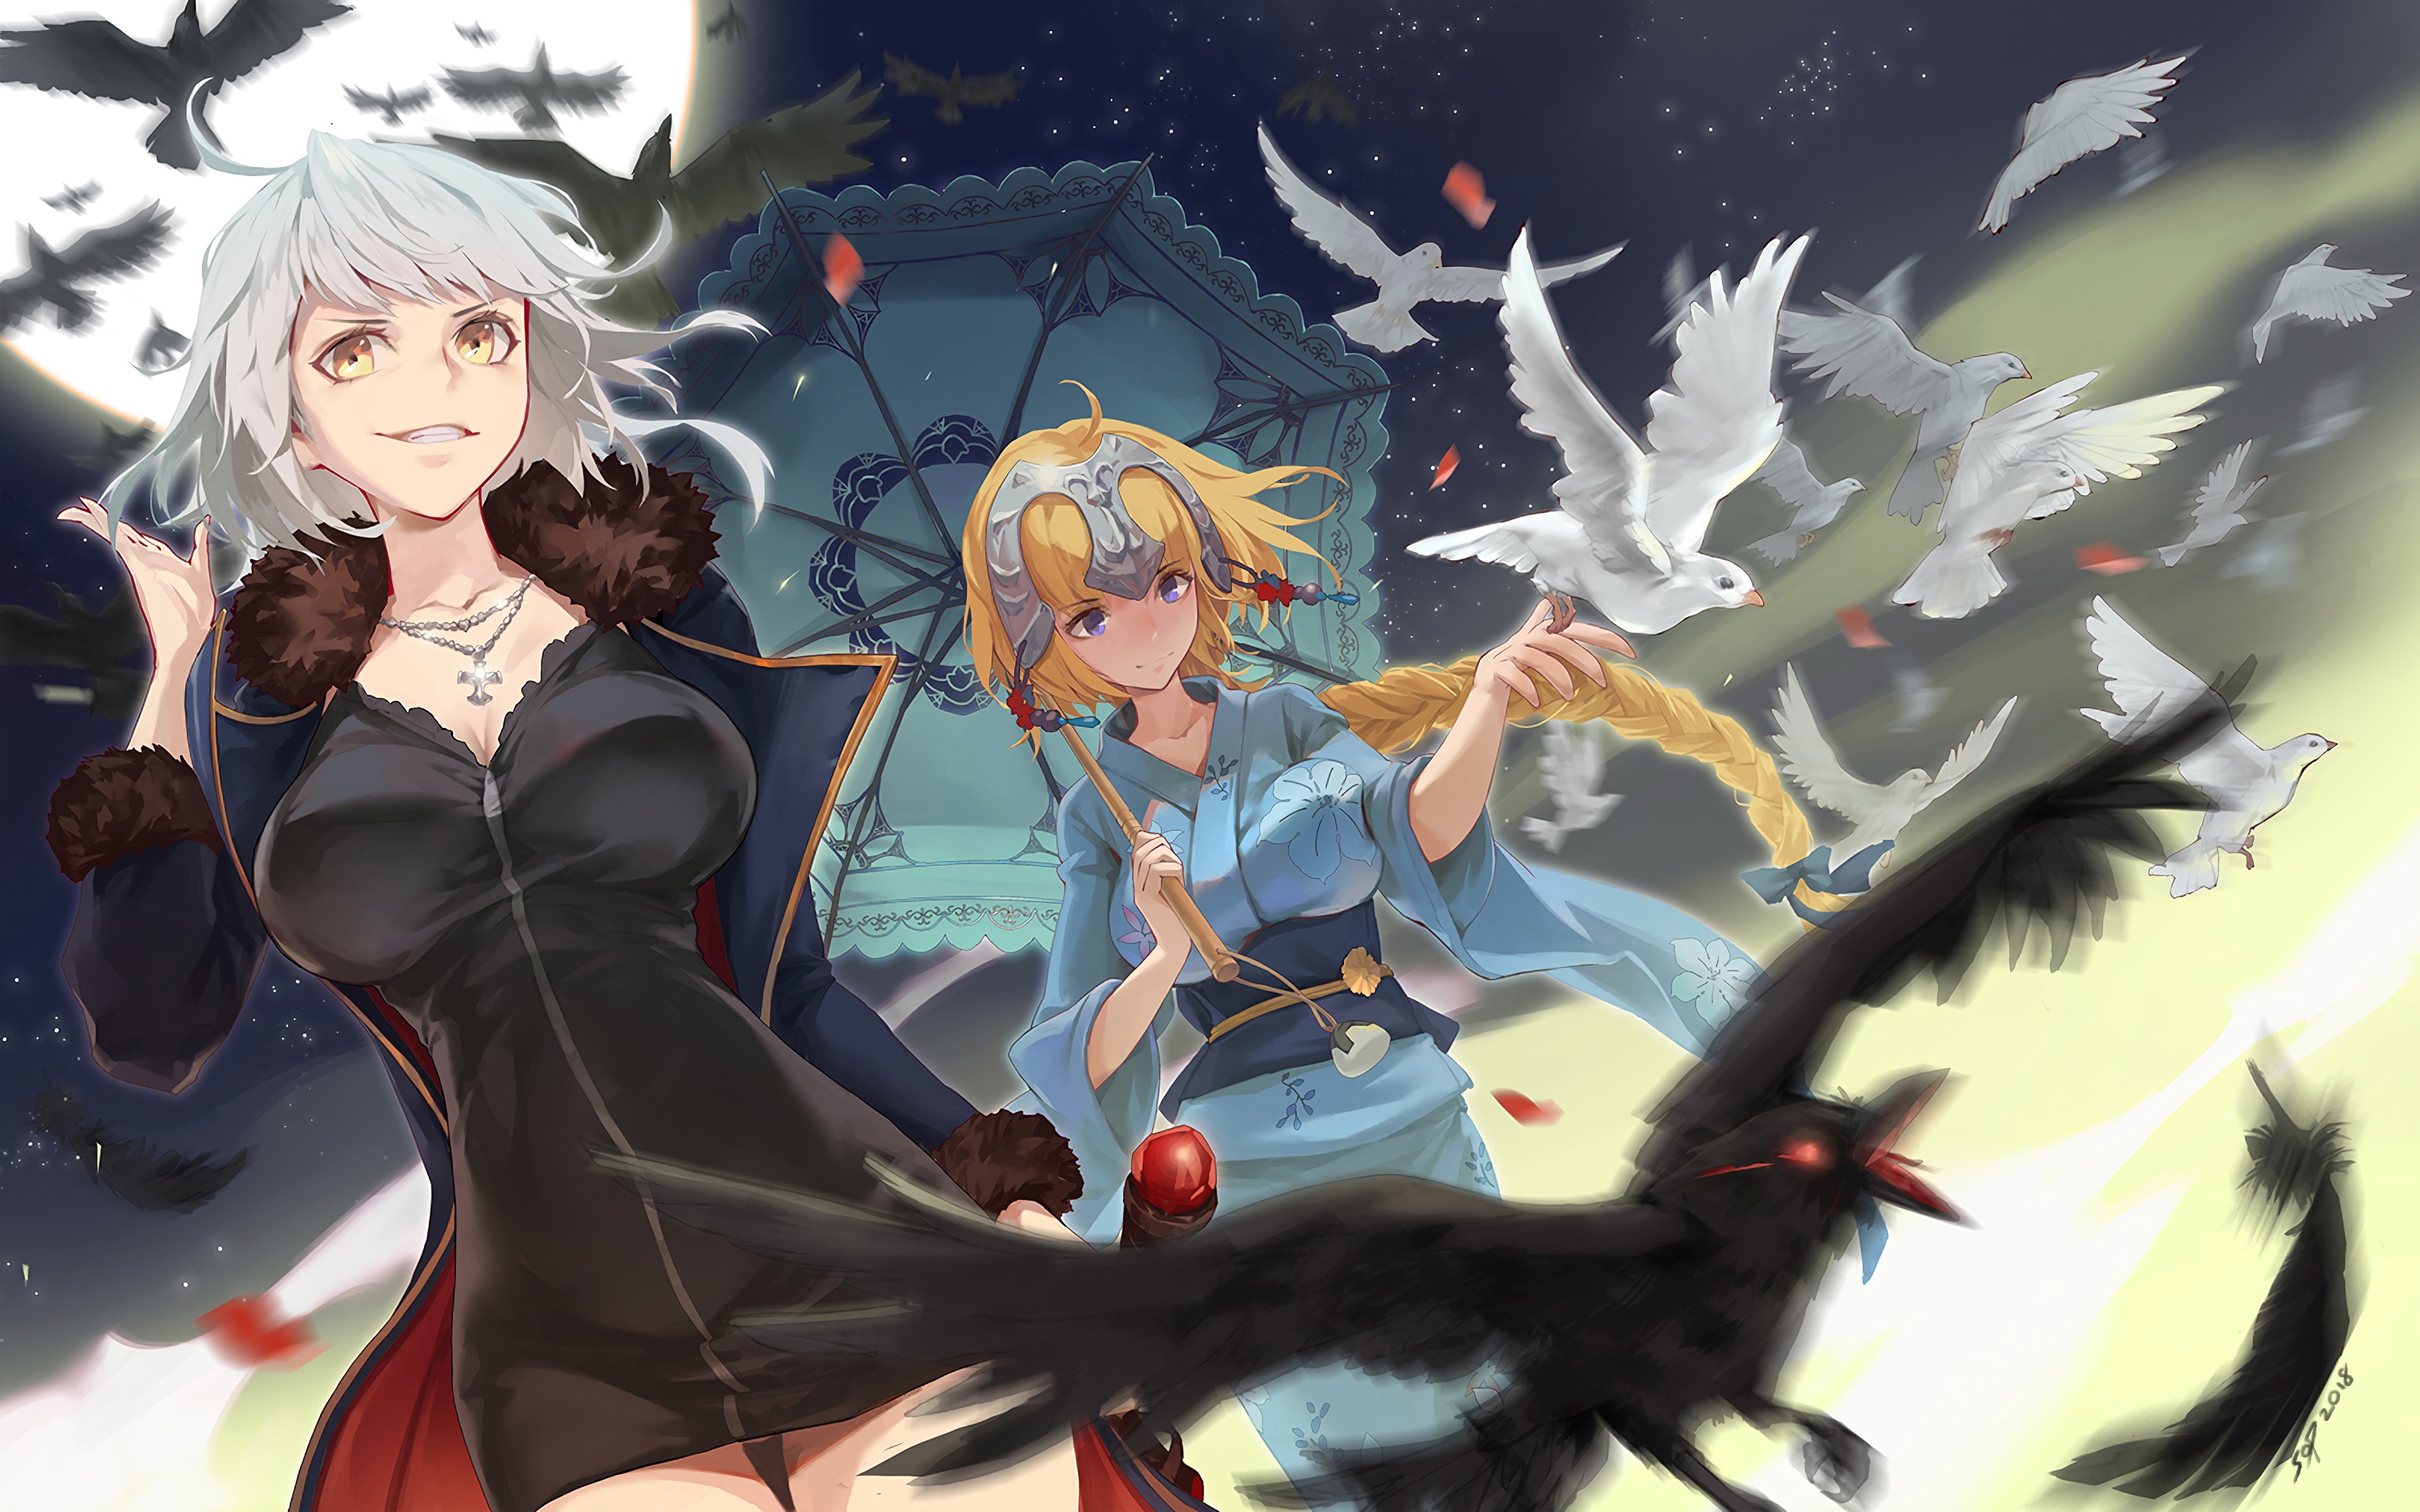 Anime 3200x2000 Jeanne (Alter) (Fate/Grand Order) Fate series Fate/Grand Order yellow eyes blue eyes white hair long hair short hair crow dove umbrella Moon night sisters kimono anime girls video games blonde Jeanne d'Arc (Fate)